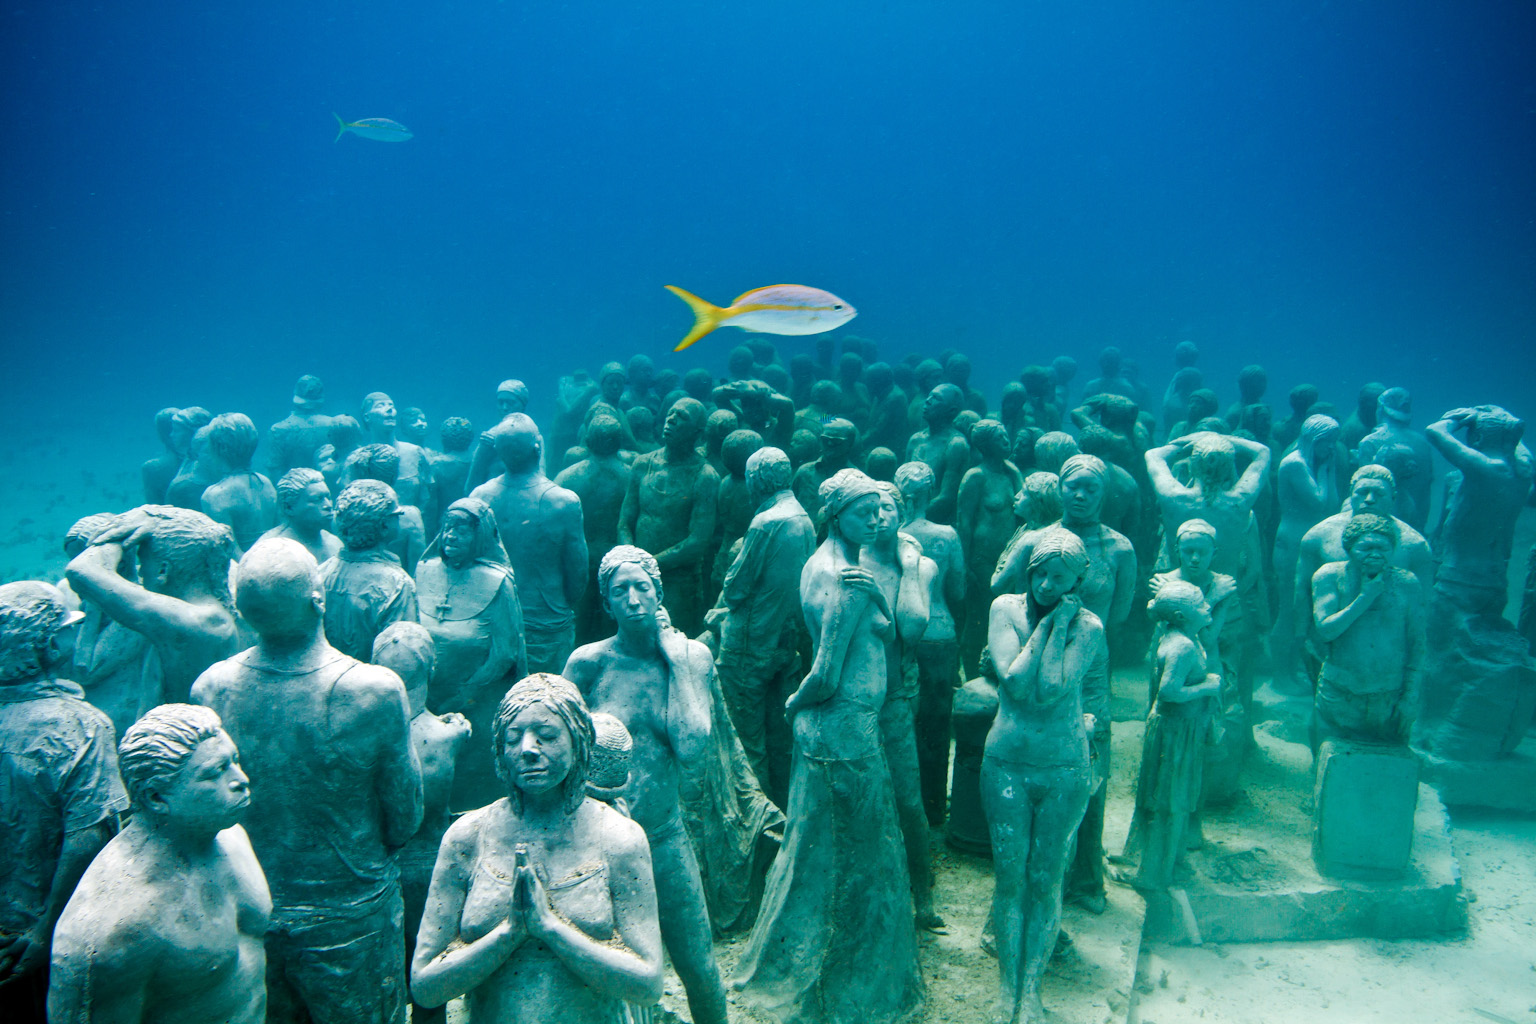 Choose environmentally friendly activities like visiting the MUSA underwater museum in Cancun